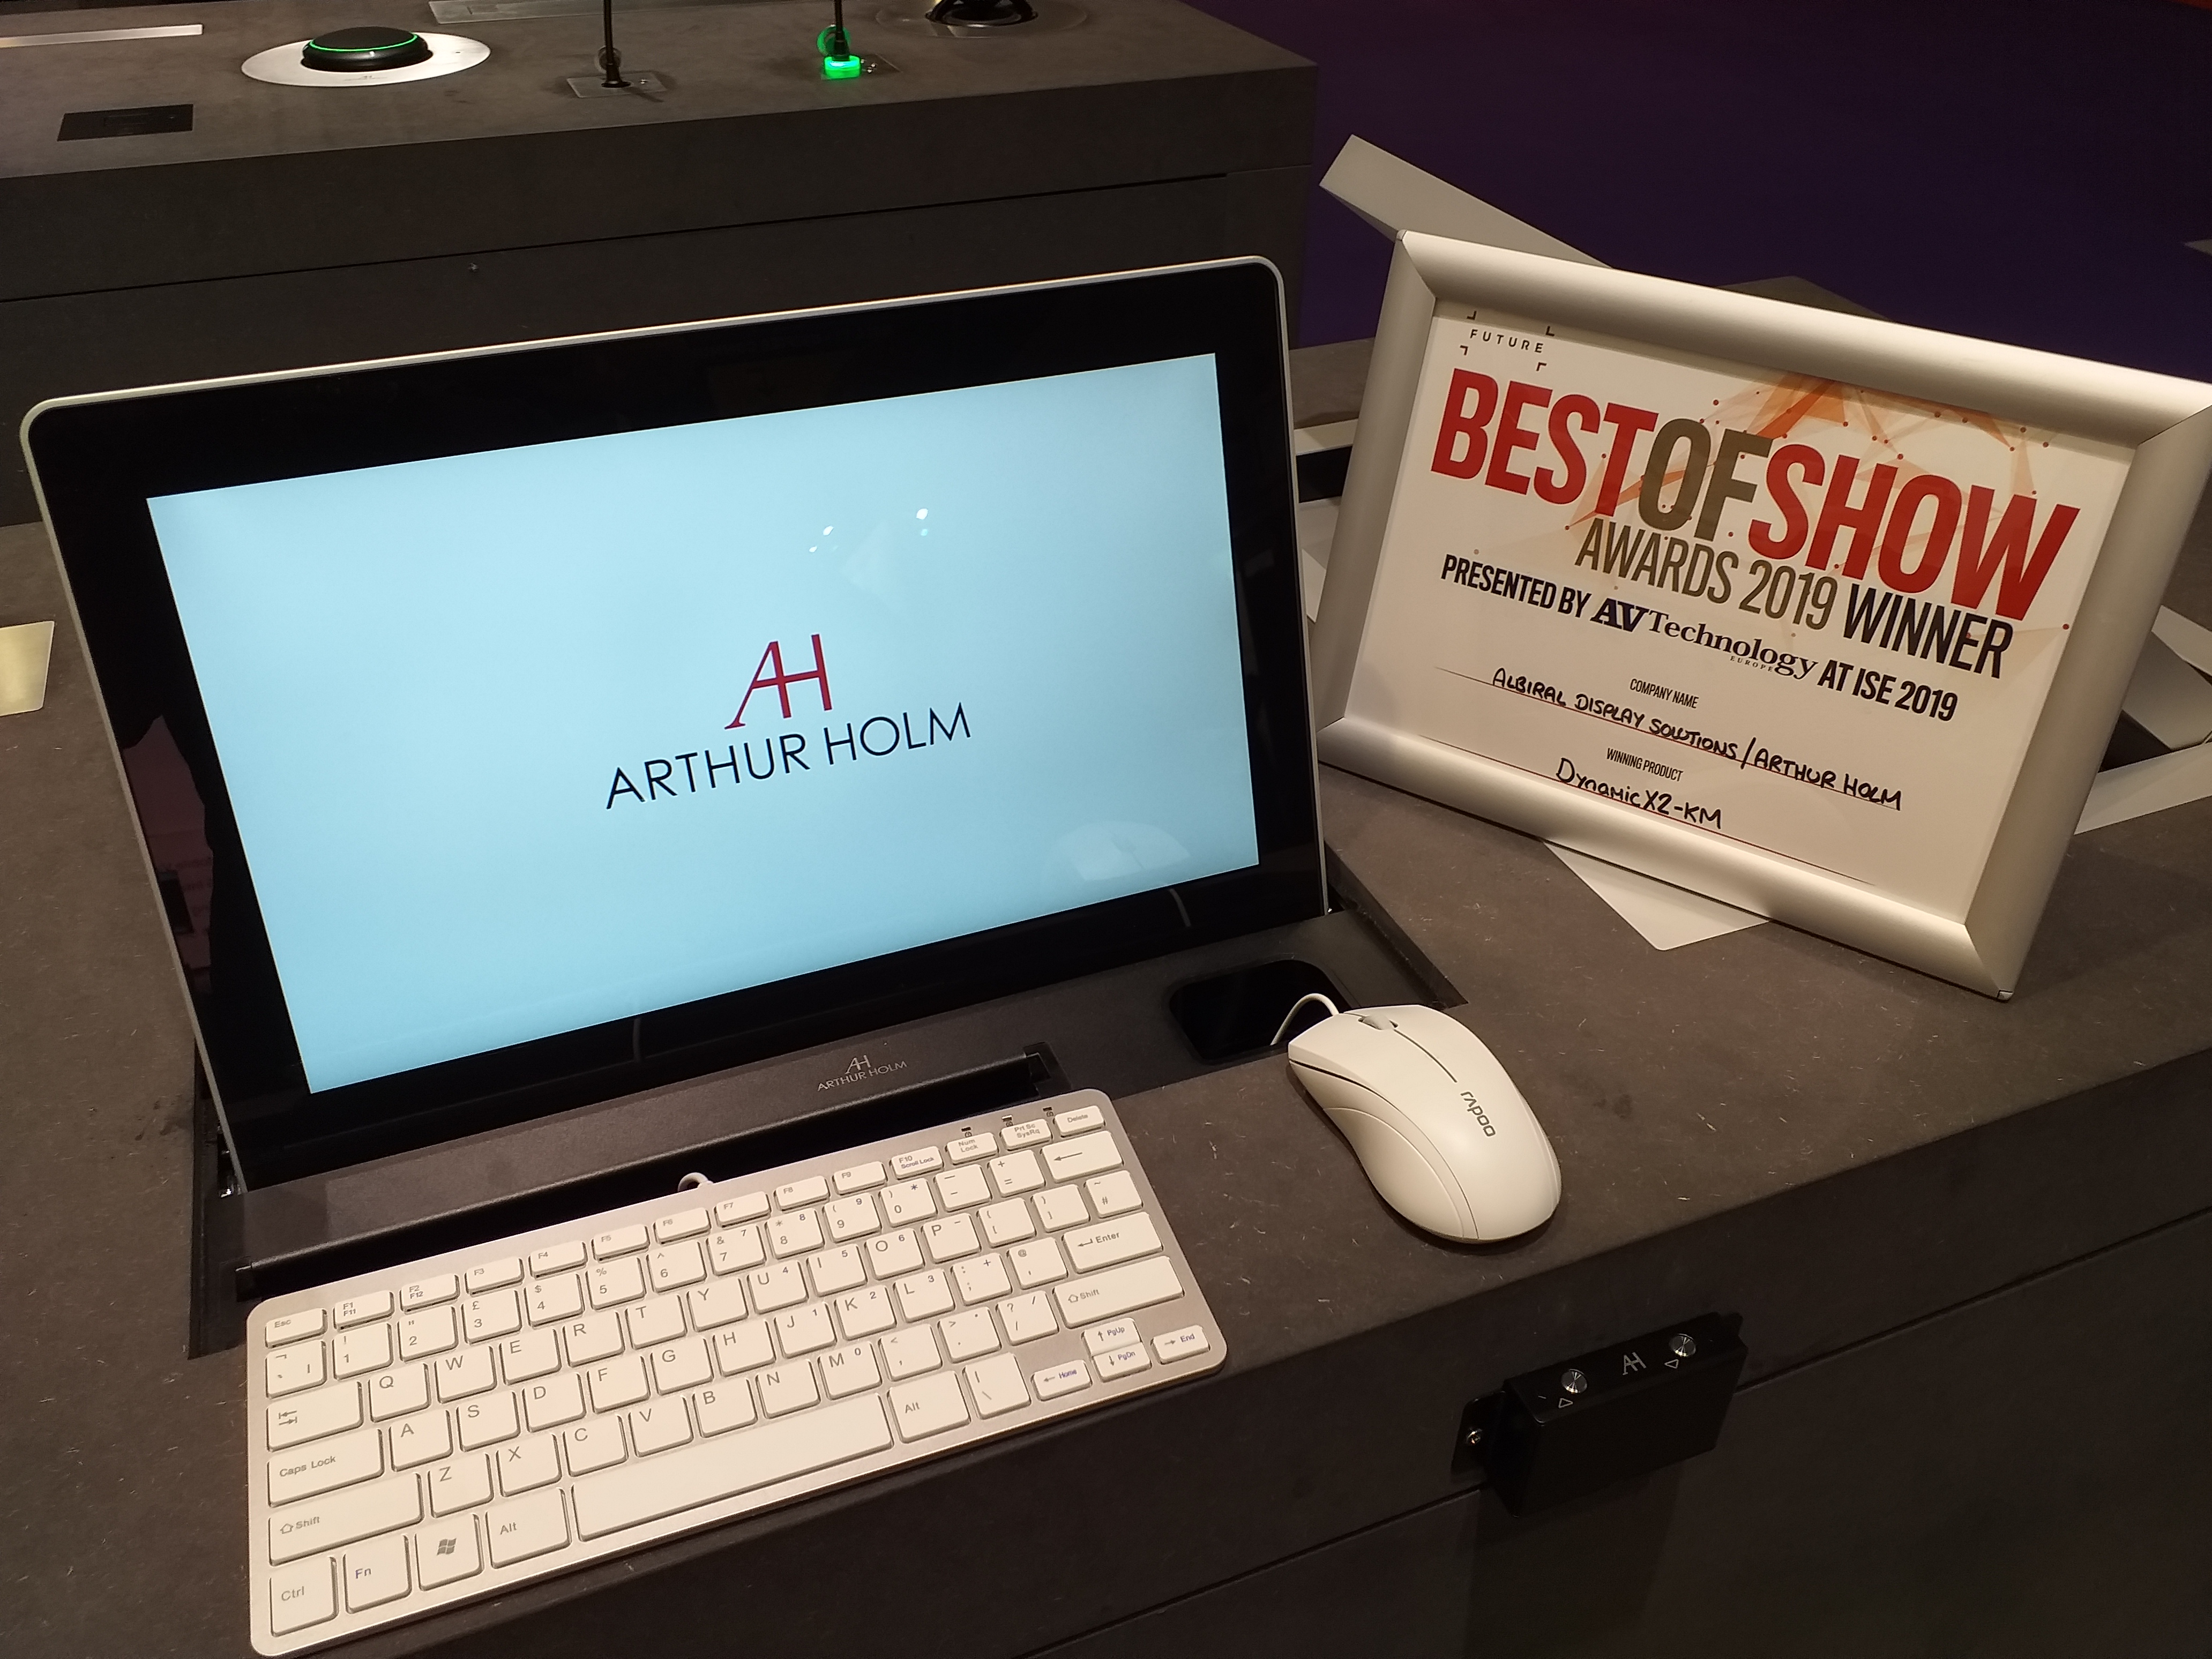 ISE 2019 RETRACTABLE MONITOR